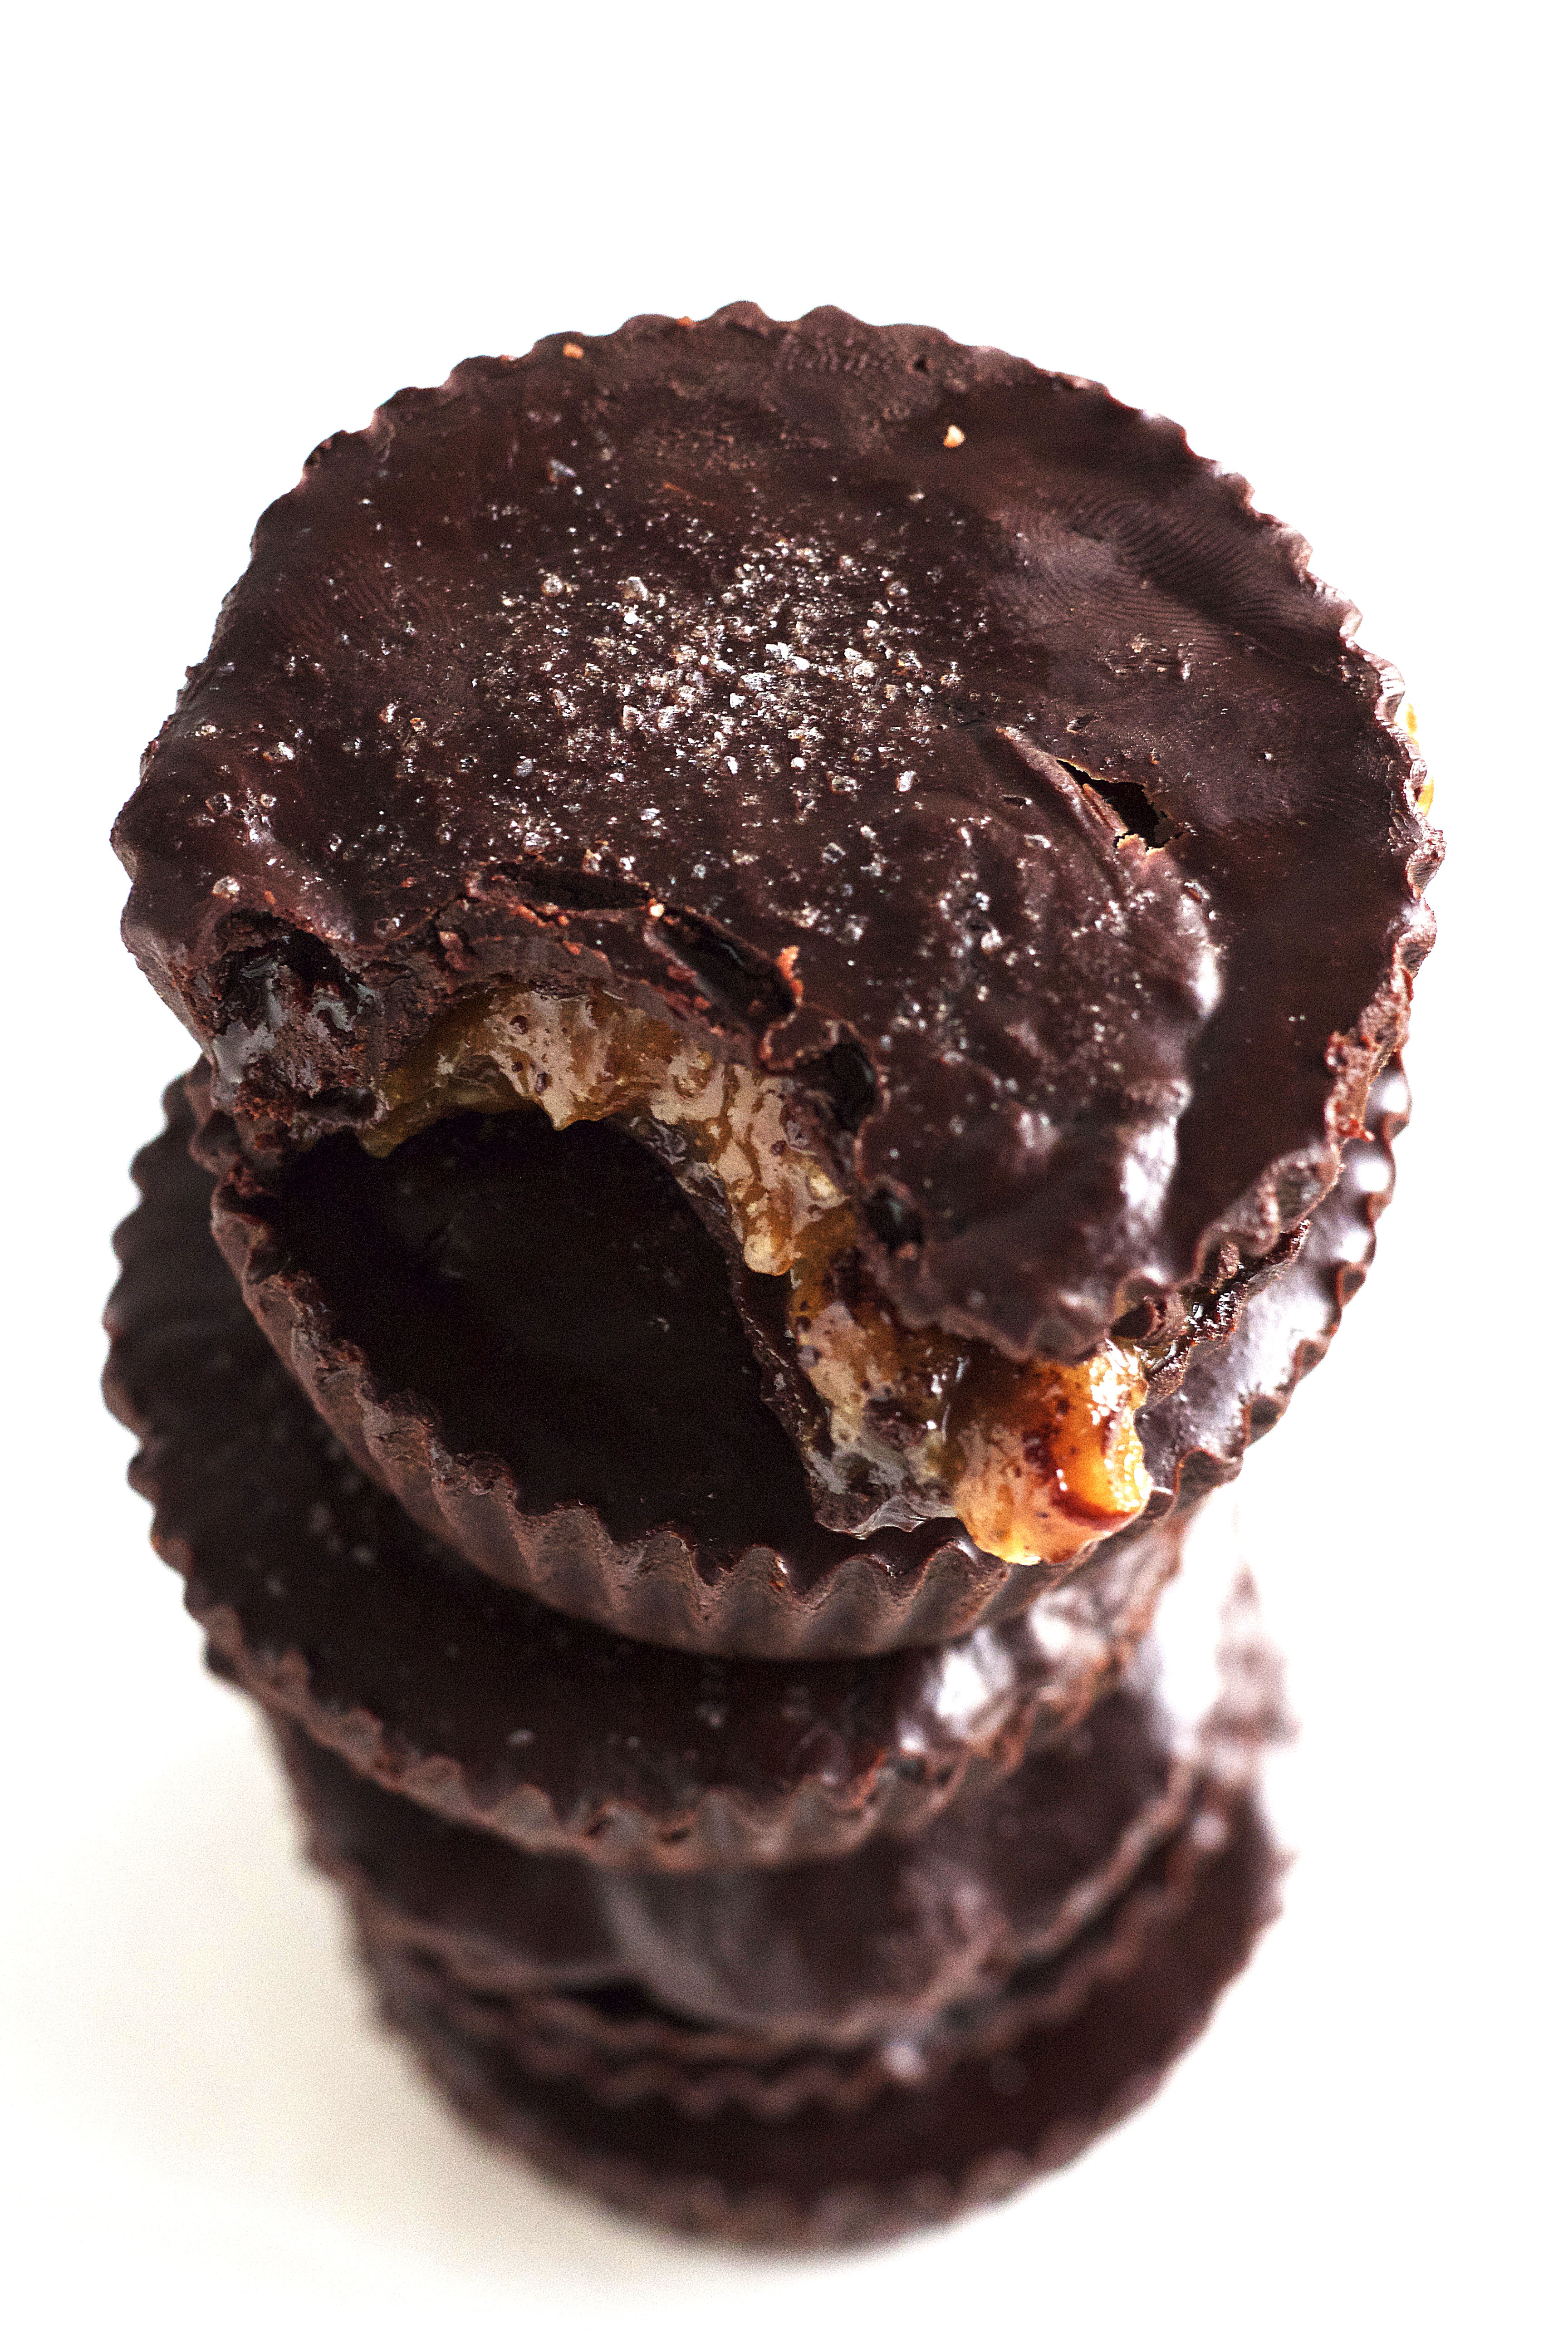 Ooey gooey chocolate cups filled with toffee AND almond butter. These Toffee Almond Butter Cups require just 8 ingredients, 30 minutes and they’re vegan-friendly, too.